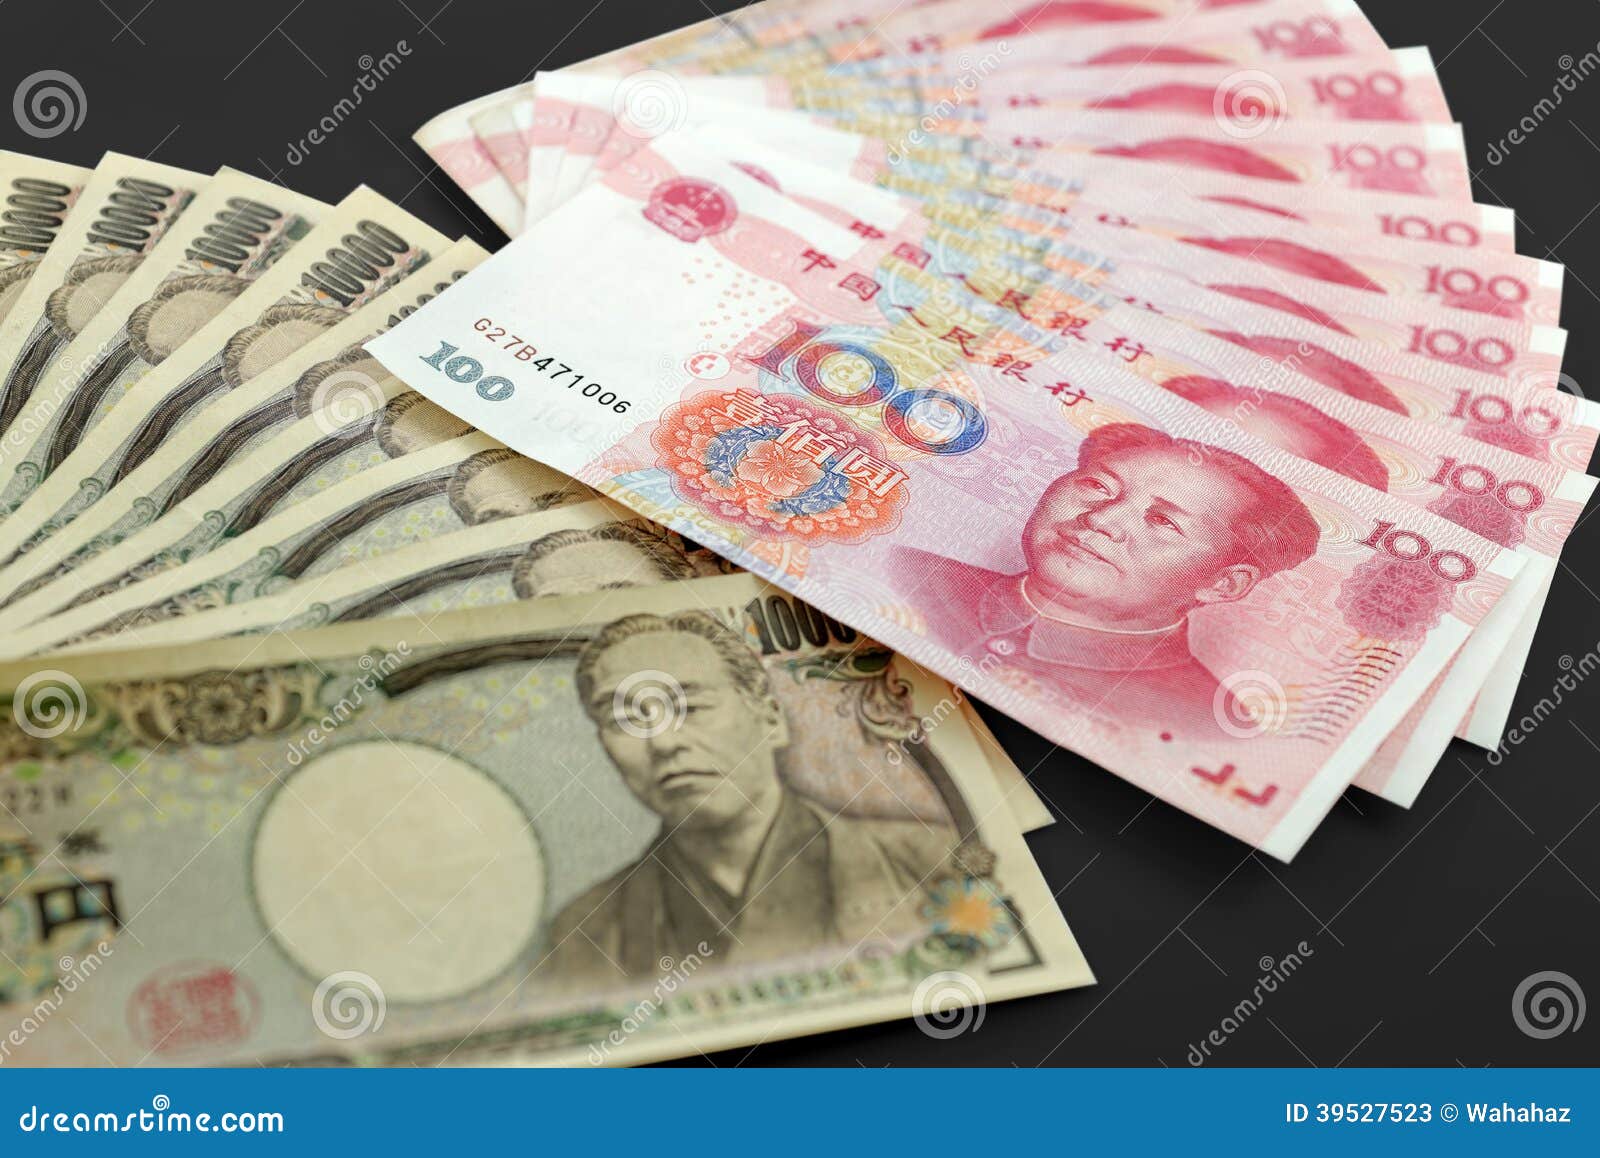 Chinese currency forex